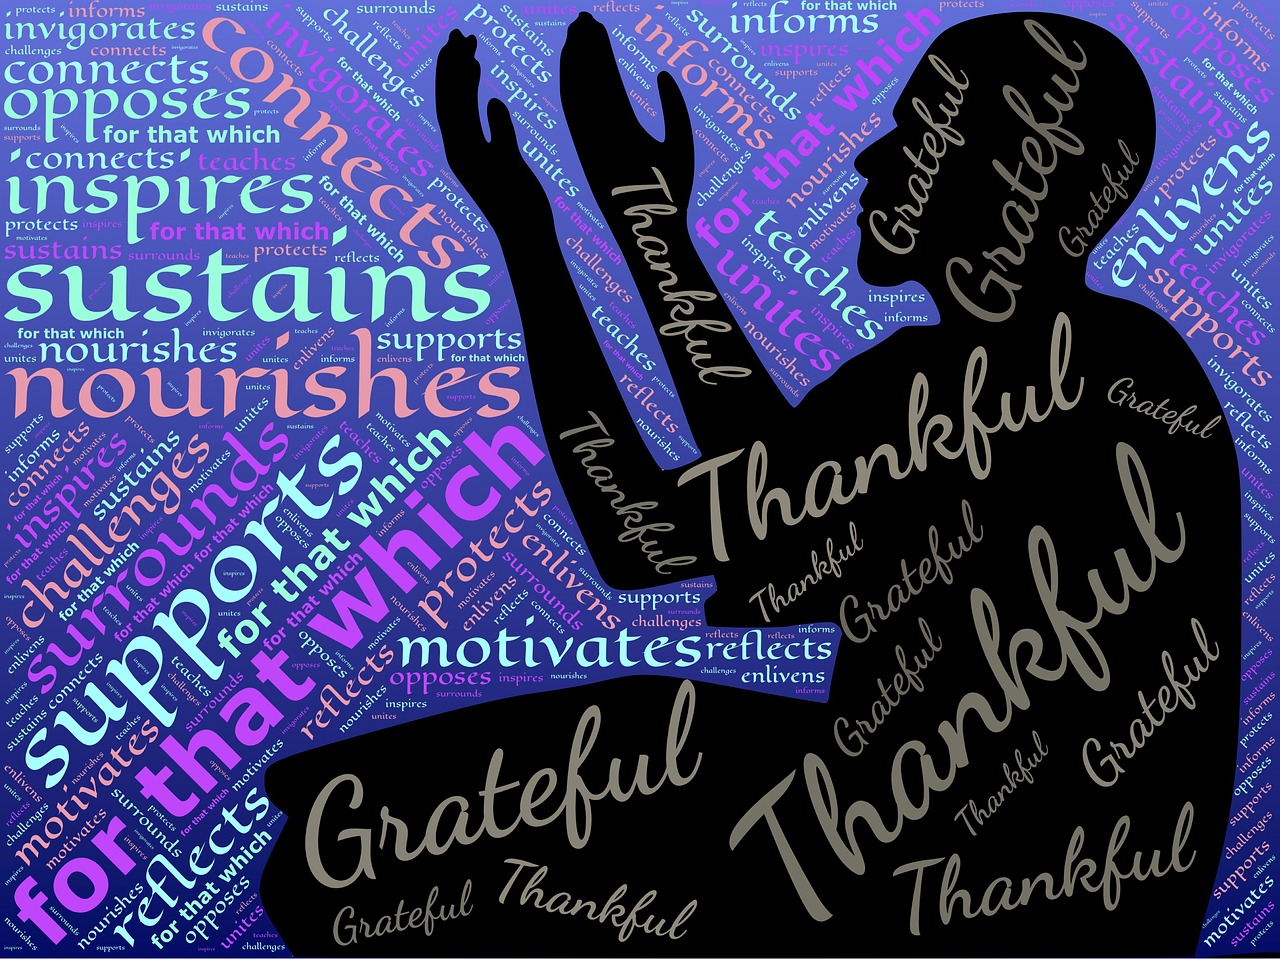 Despite COVID, 7 Things We Can Always Be Thankful For